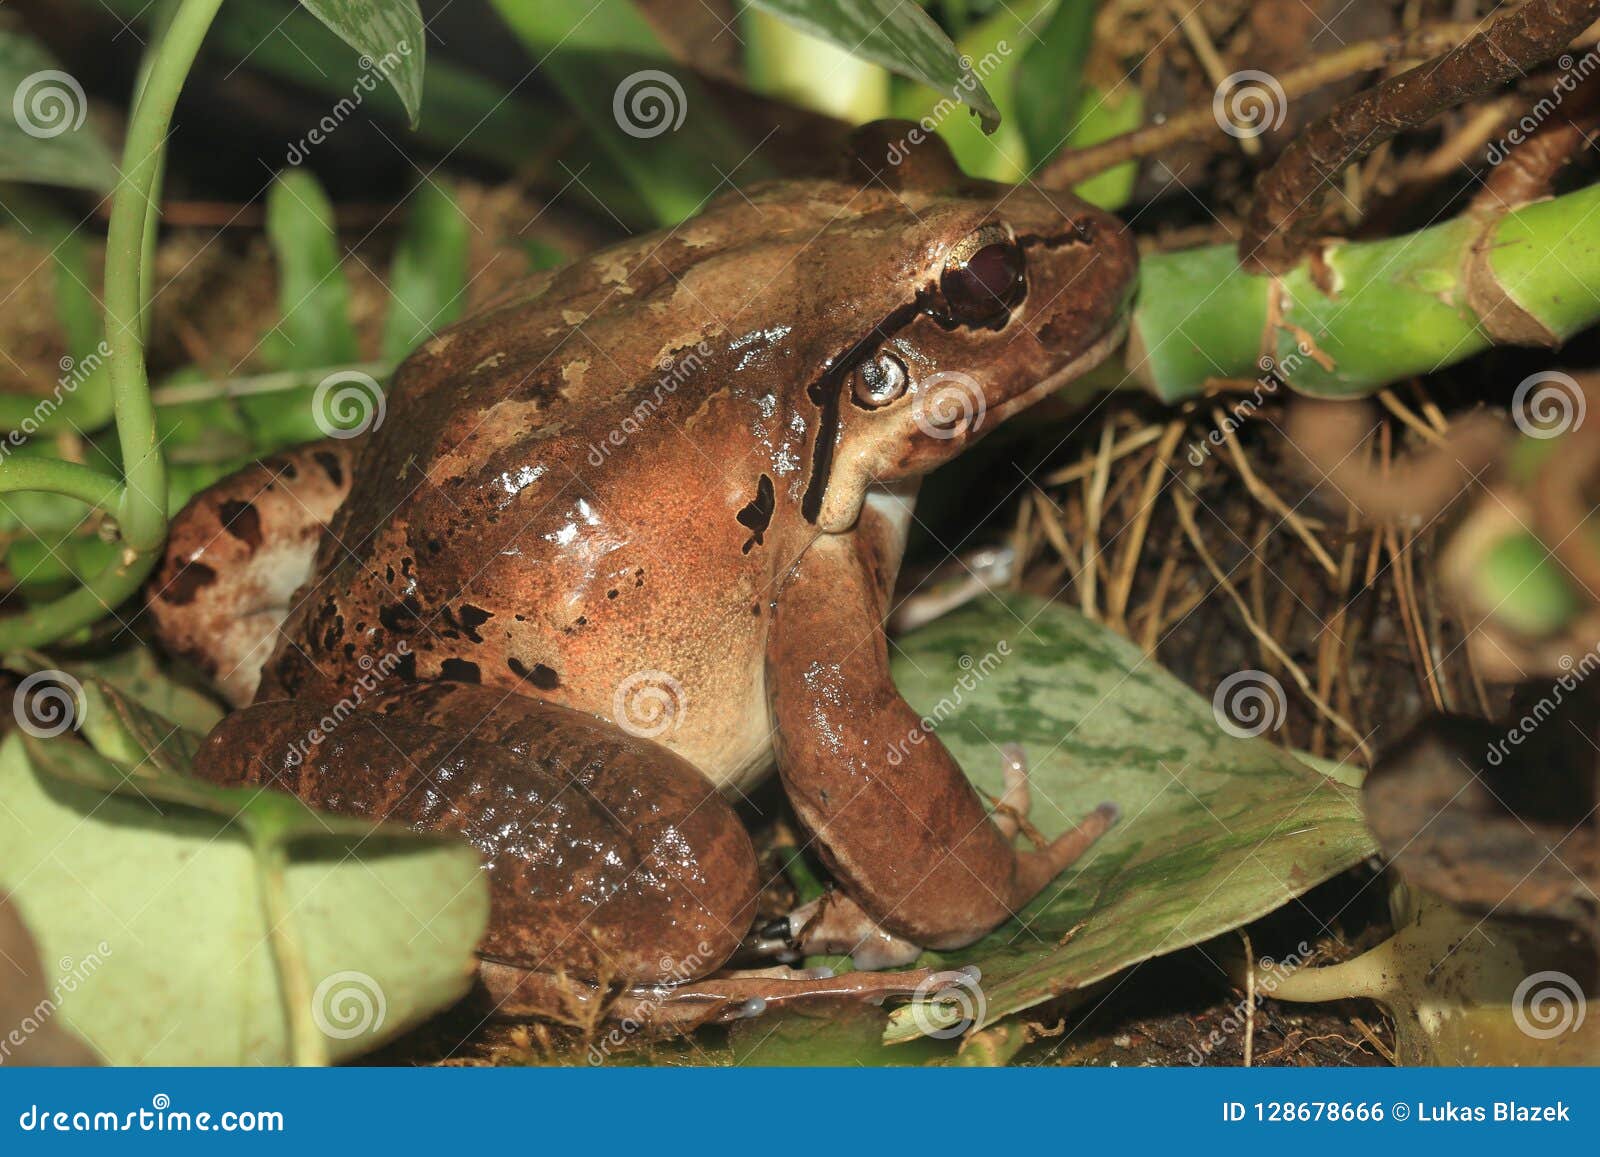 giant ditch frog